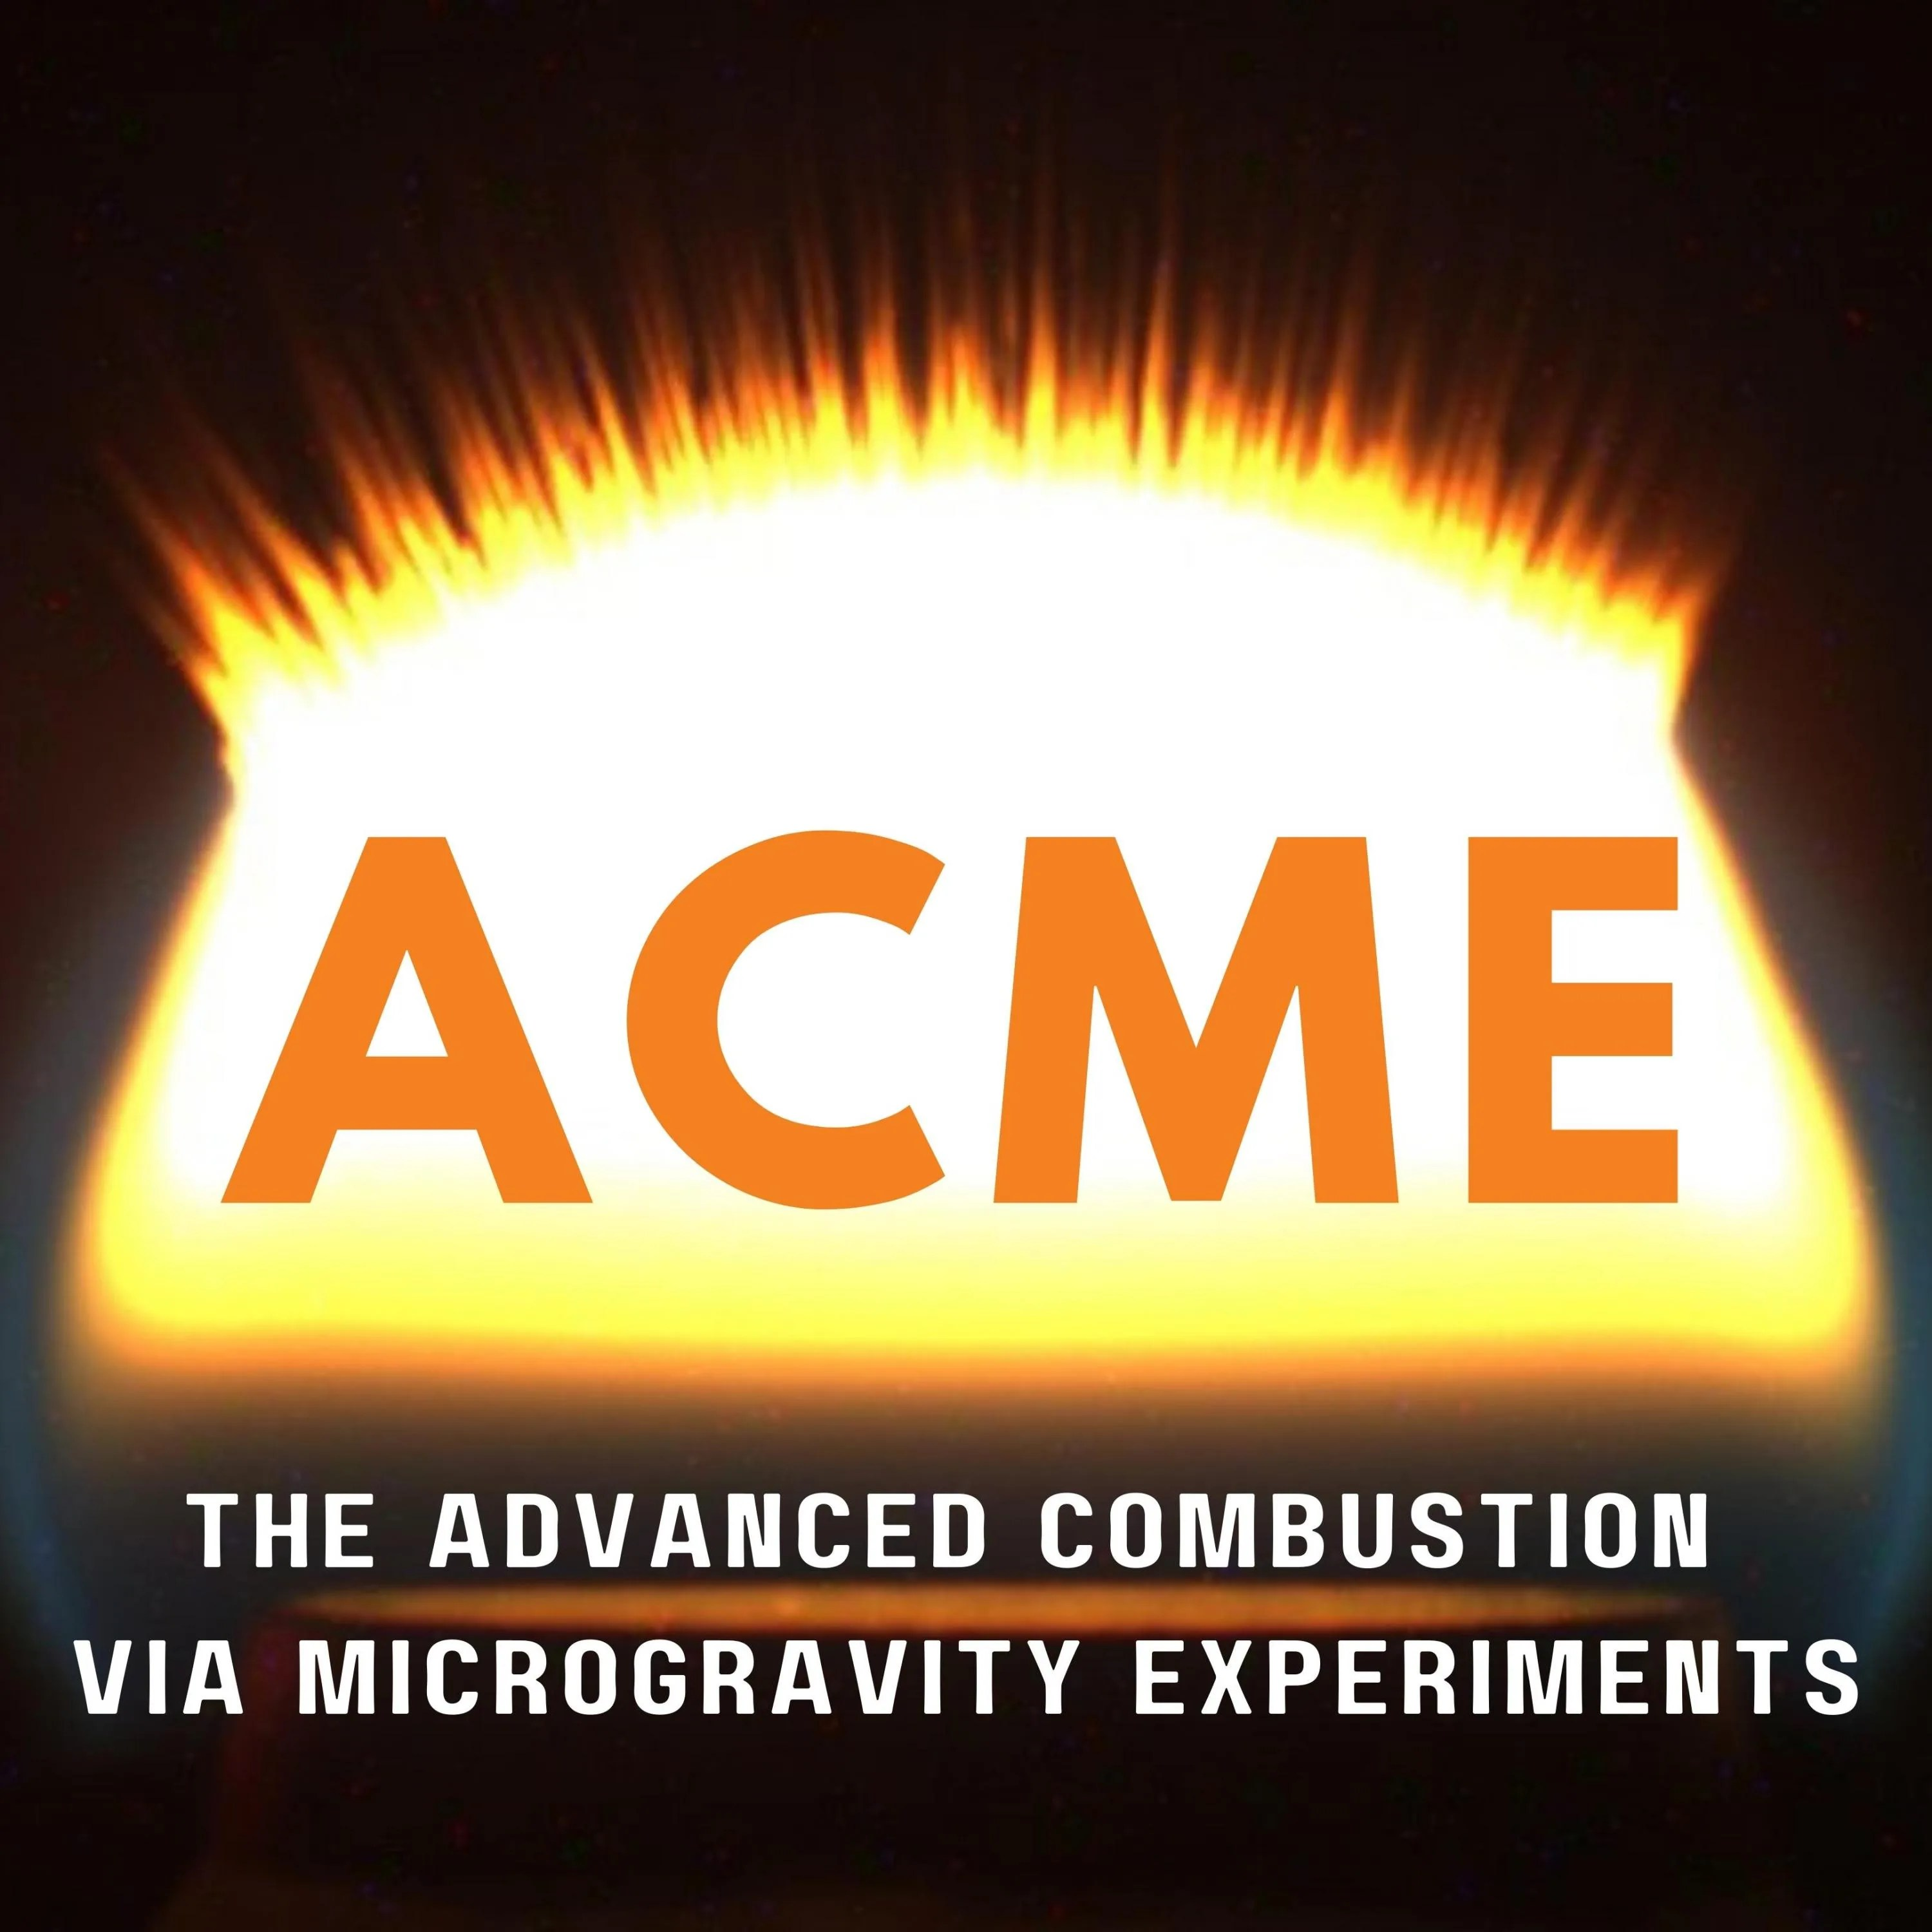 Why flames are yellow and blue + microgravity